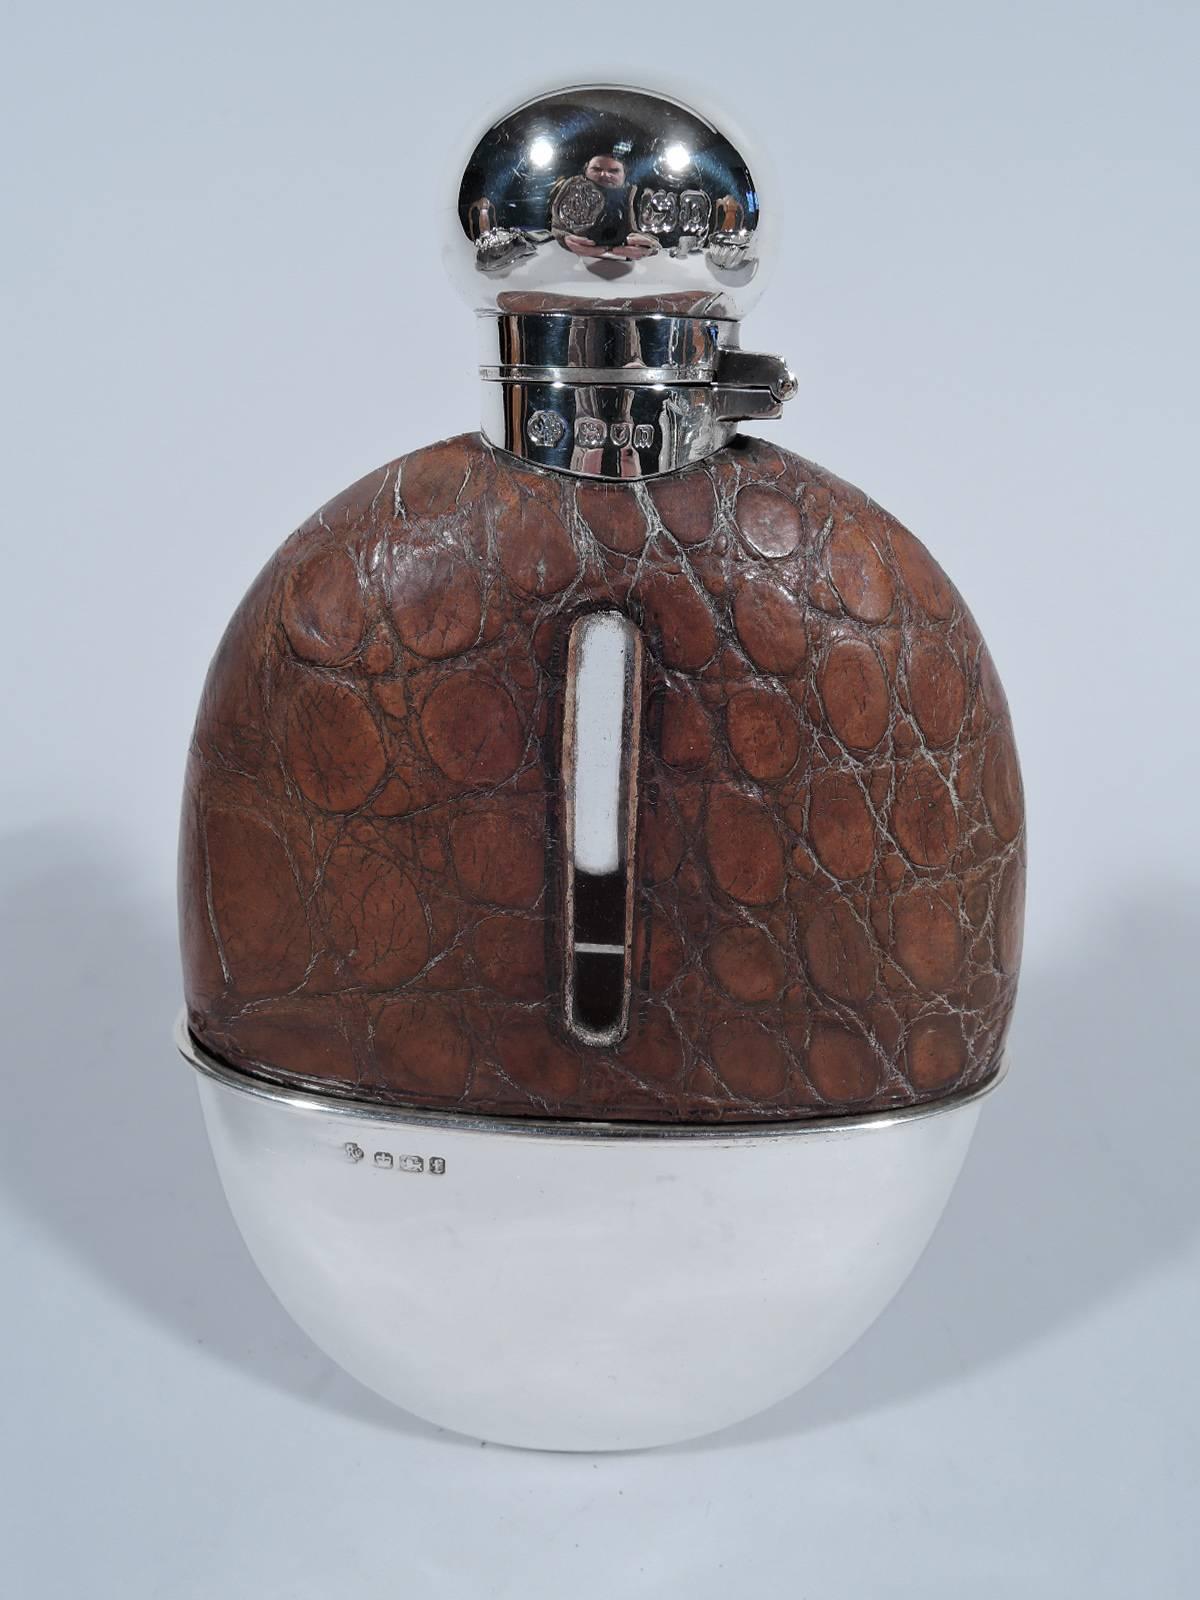 Victorian safari flask. Made by William Hutton & Sons in England. Clear glass with detachable sterling silver cup and short neck with hinged cork-lined cover. Top encased in brown leather with cut-out tubular windows. Wide body suitable for a large